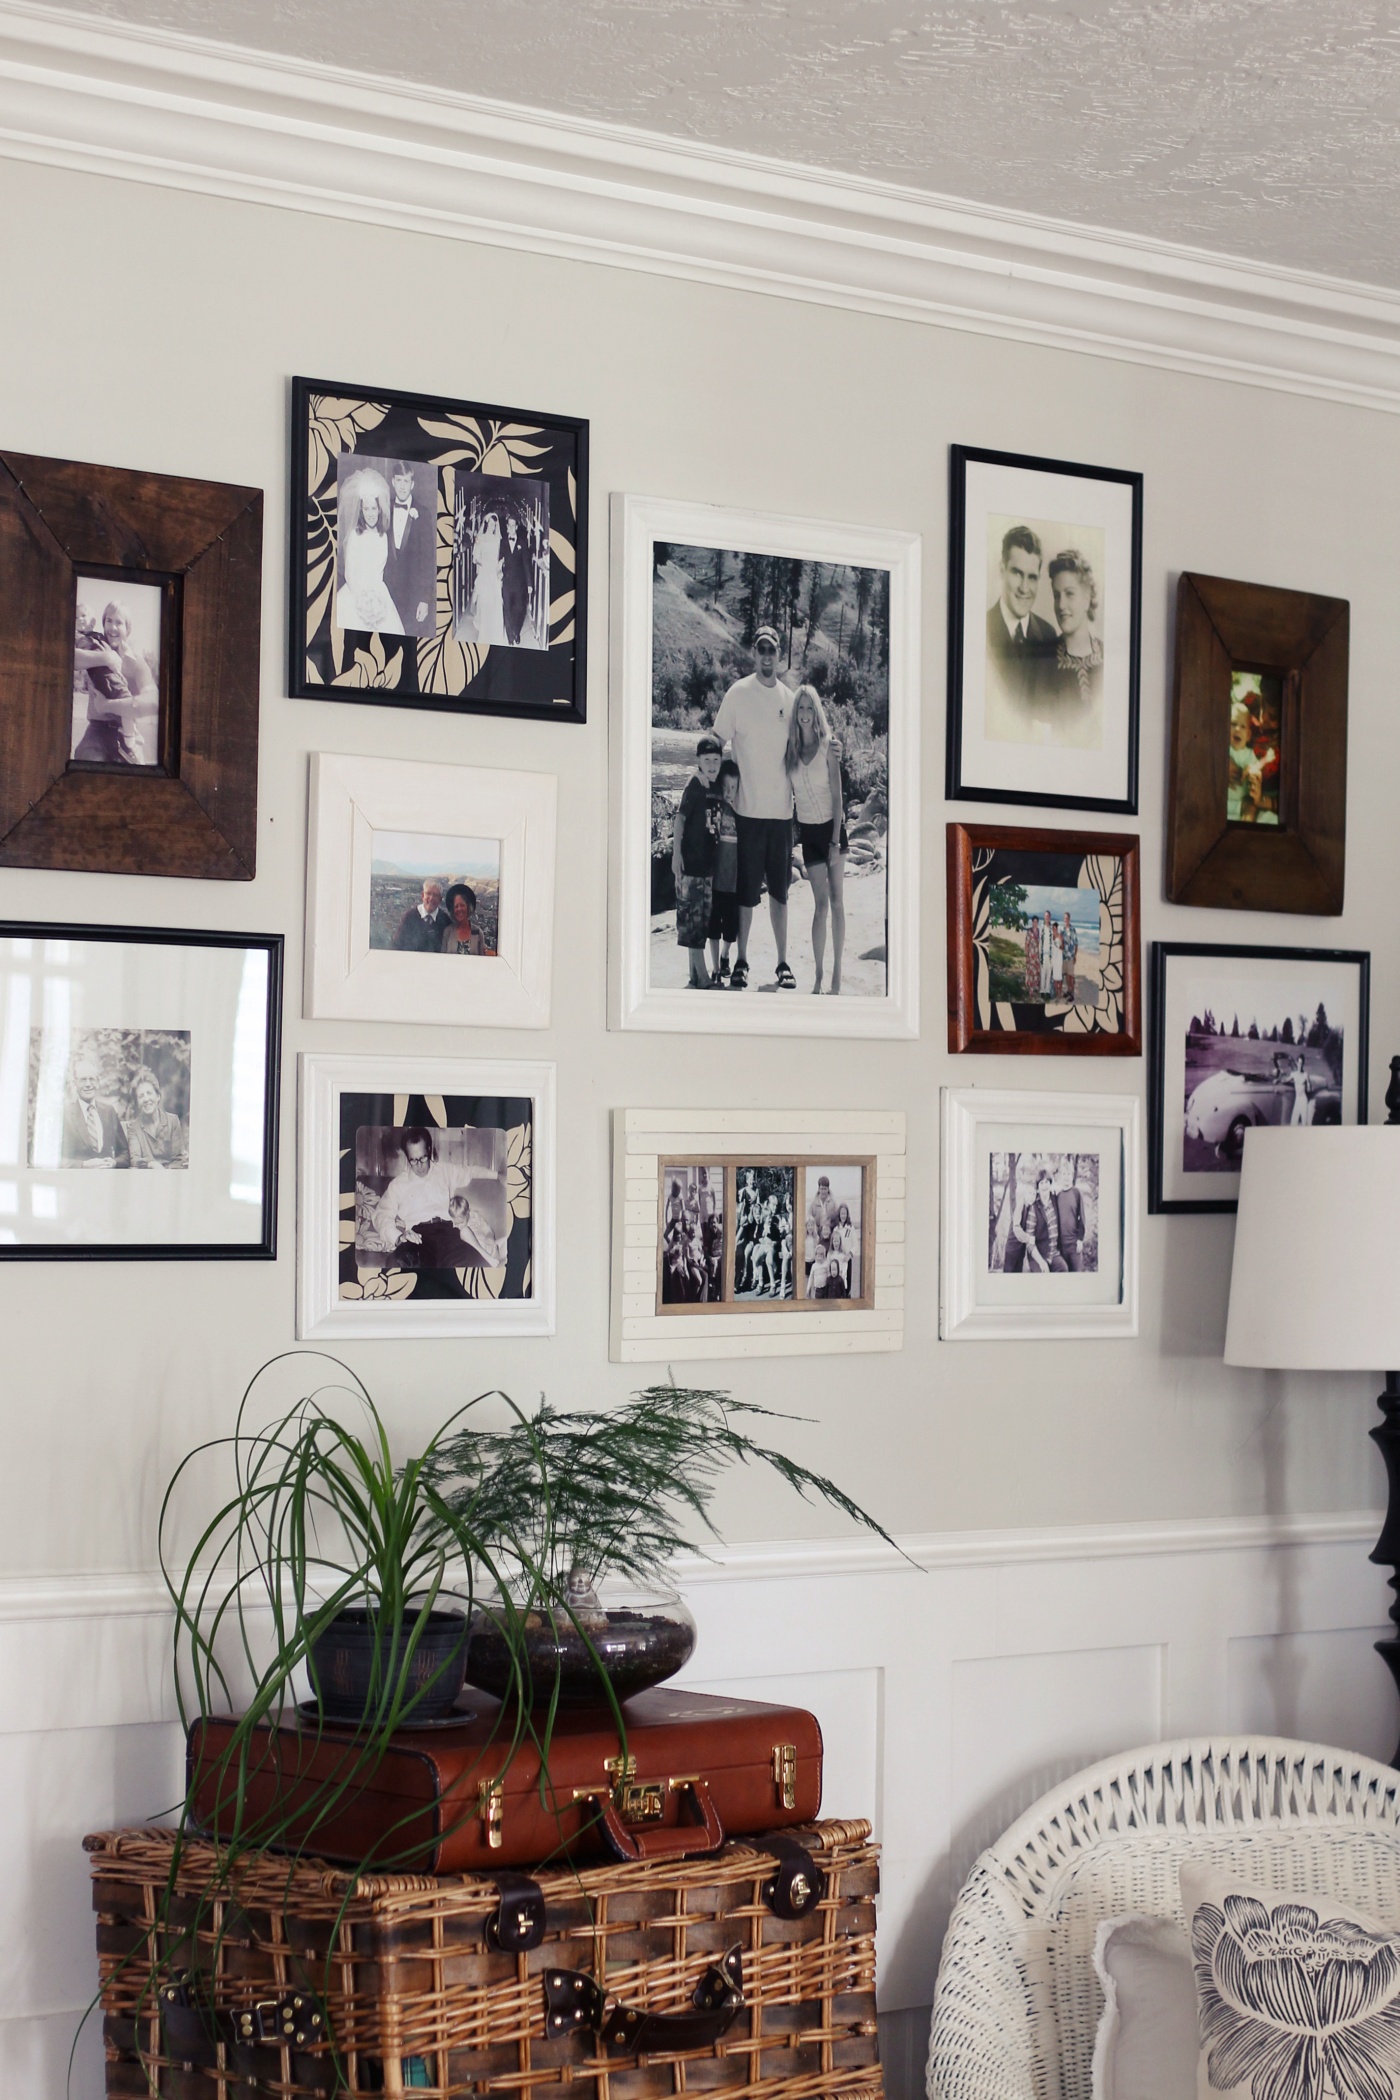 New Photo Gallery Wall in our Living Room. - The Wicker House